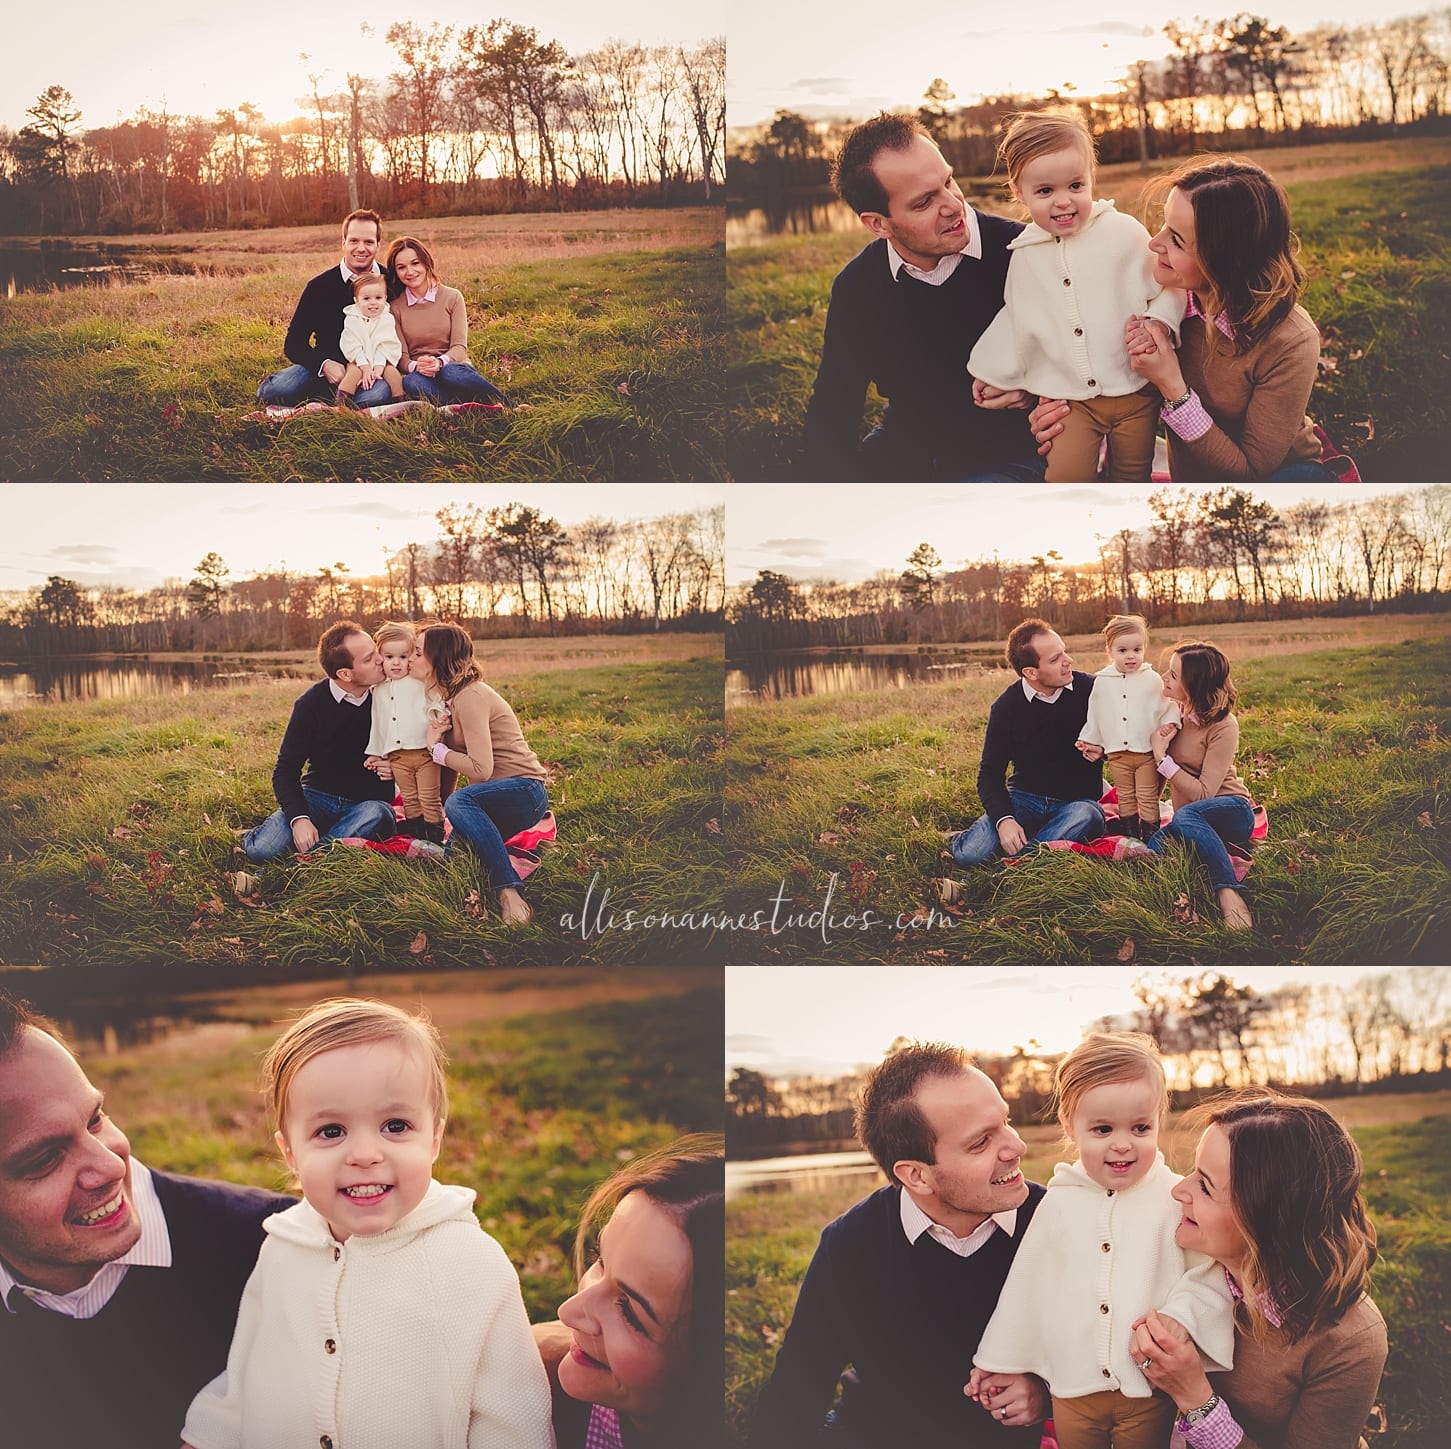 Google, customer for life, Best family photographer in South Jersey, AllisonAnne Studios, Allison Gallagher, Hammonton, thank you notes are important, self reflection, love, november sunset